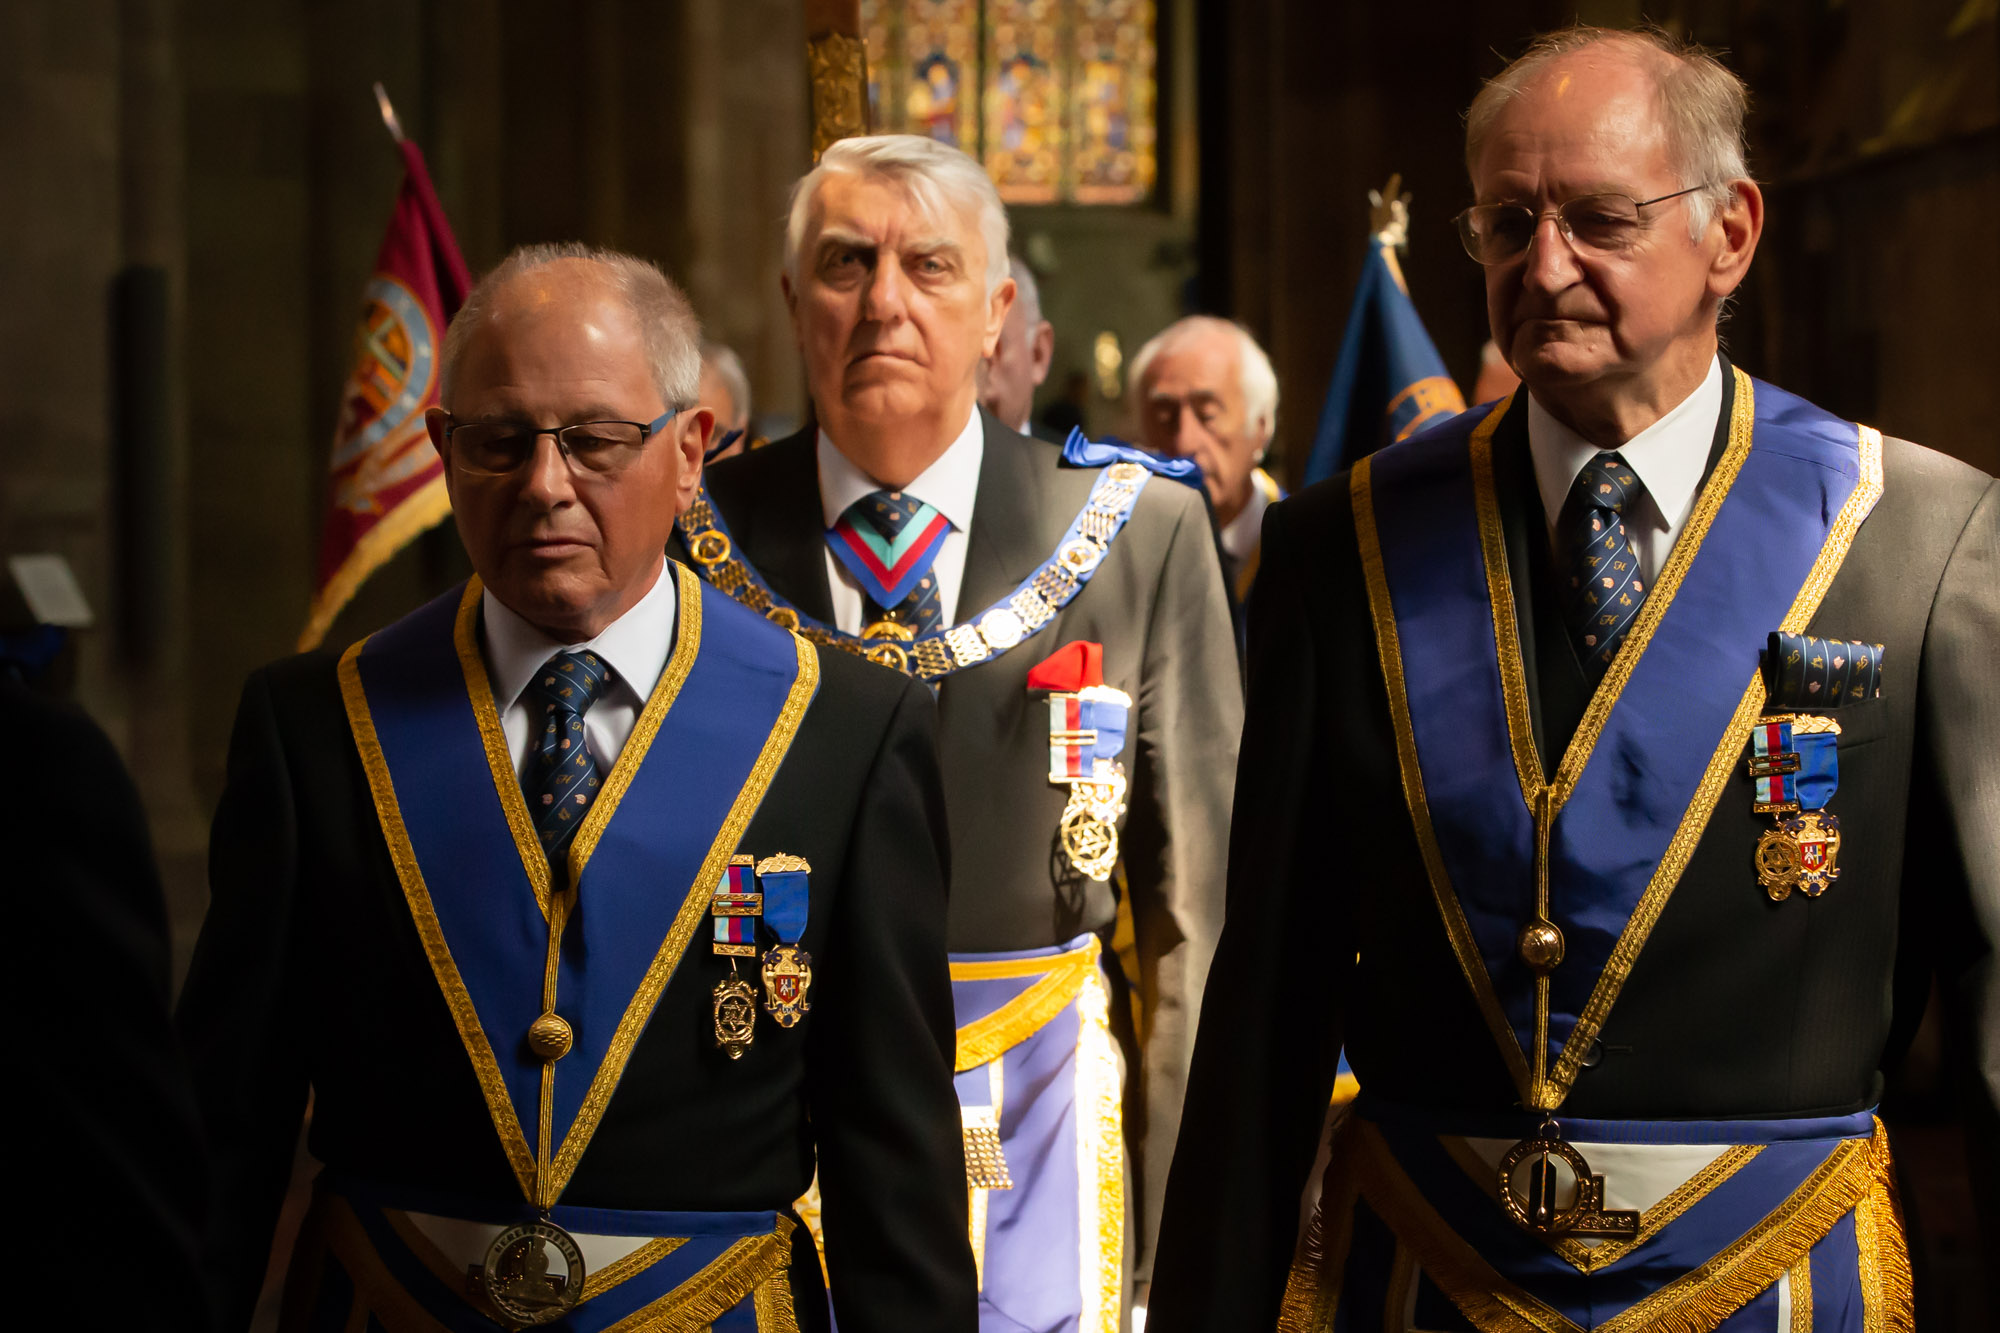 The Provincial Grand Wardens W Bro Mark Bennett & W Bro David Hudson processing into the Cathedral followed by the Deputy Grand Master, VW Bro Graham King.